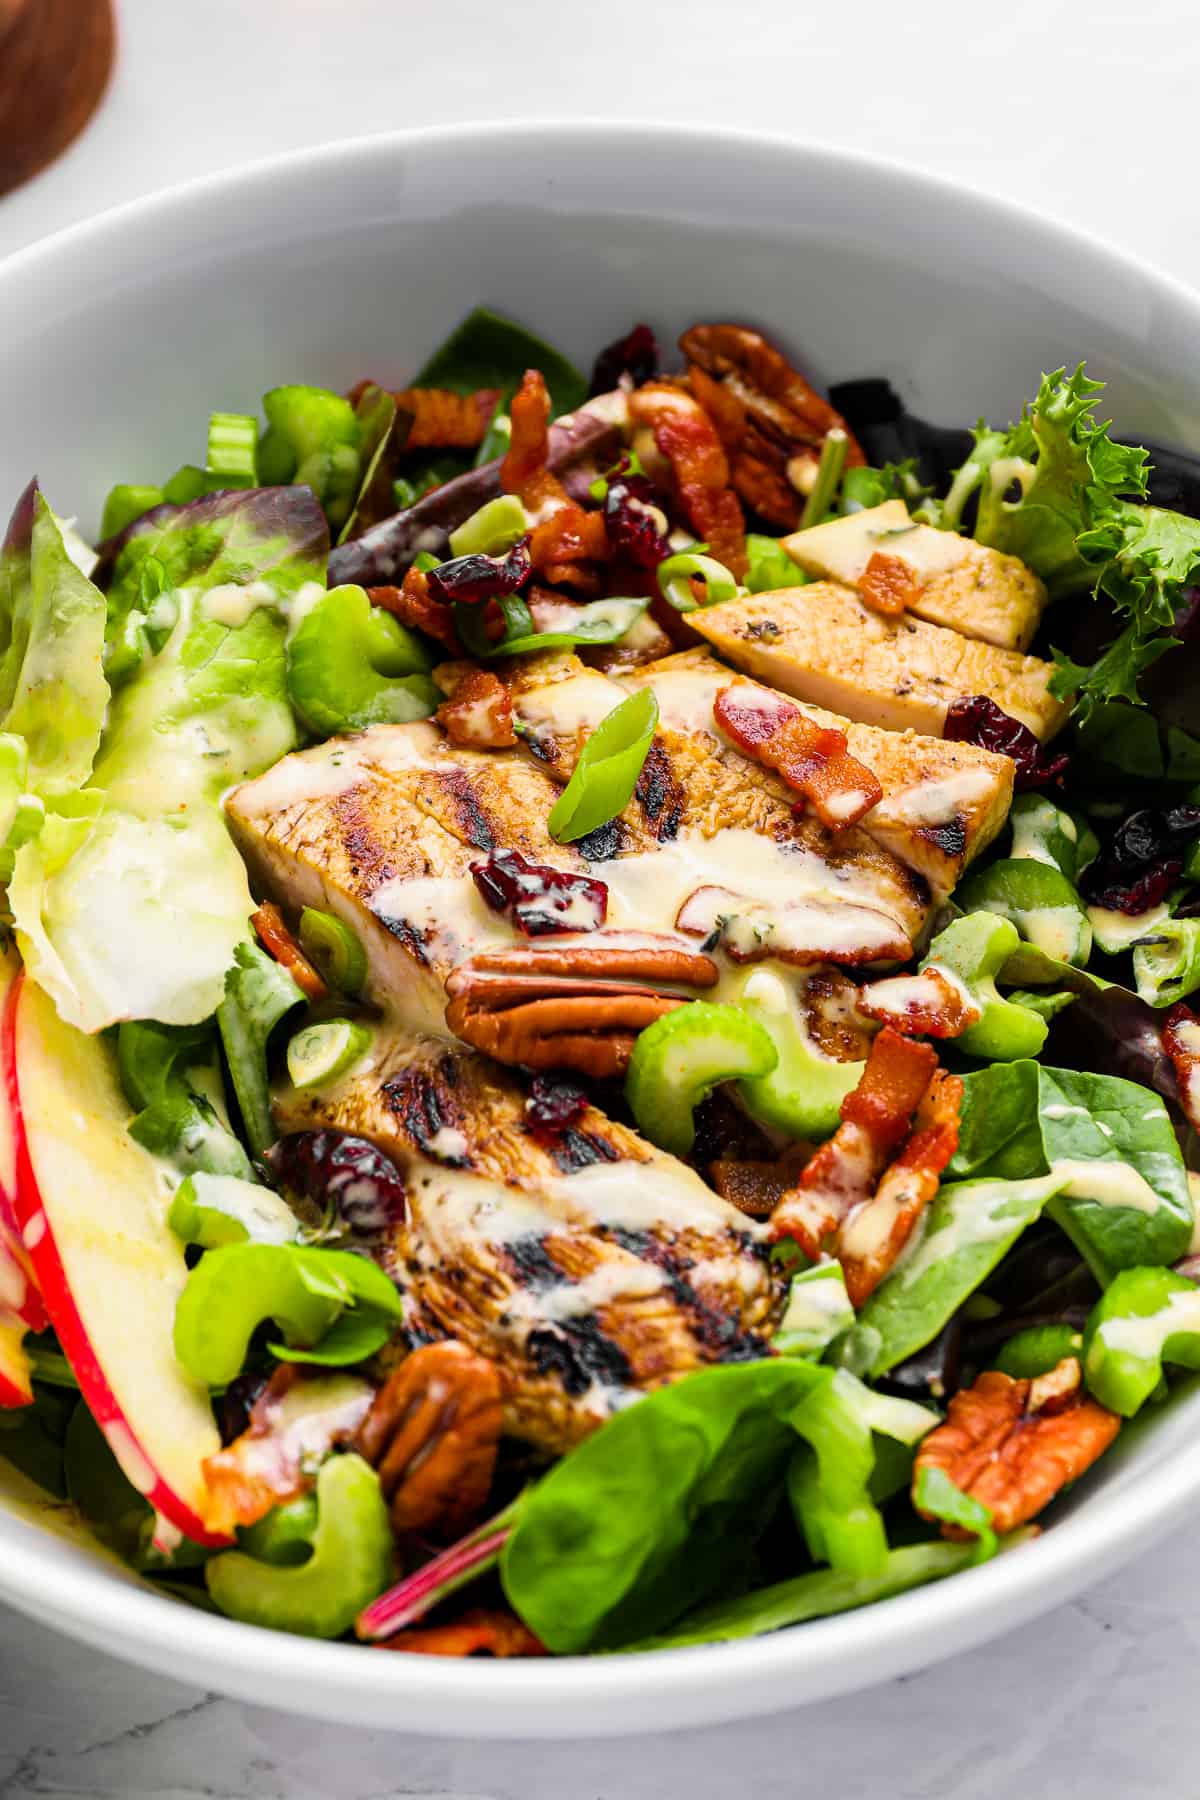 fall harvest salad filled with greens, chicken, walnuts, apple slices, and more.